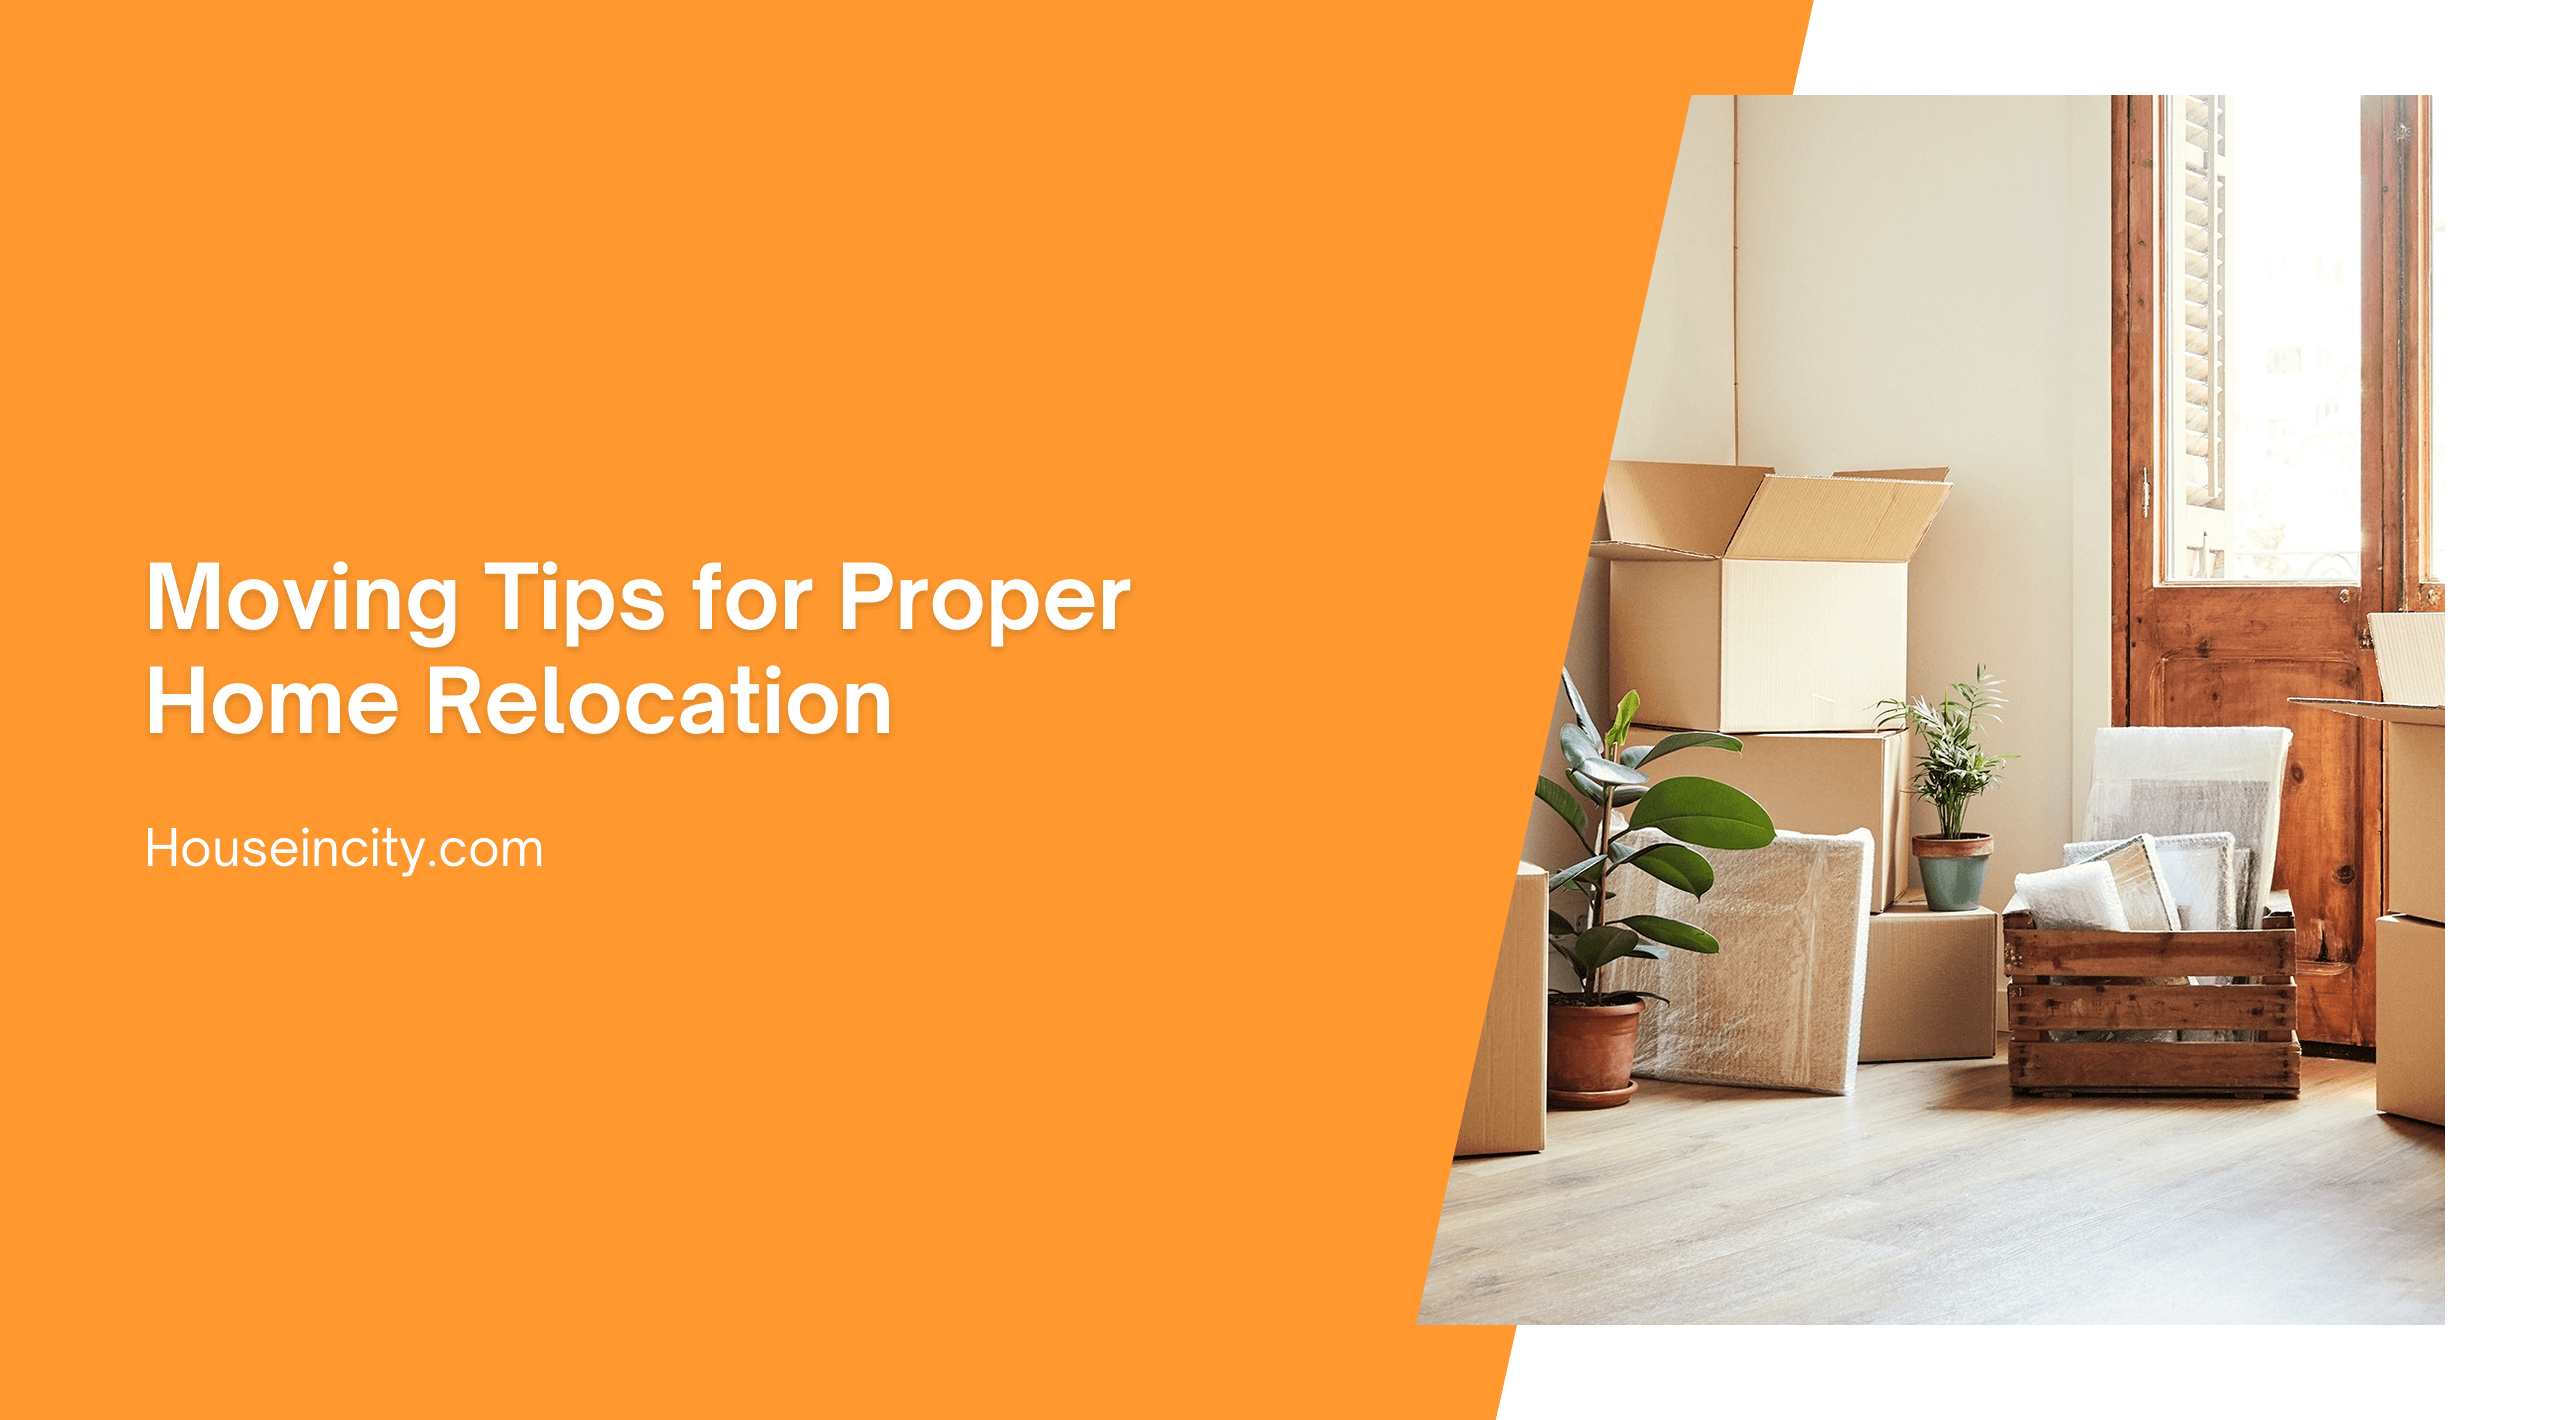 Moving Tips for Proper Home Relocation